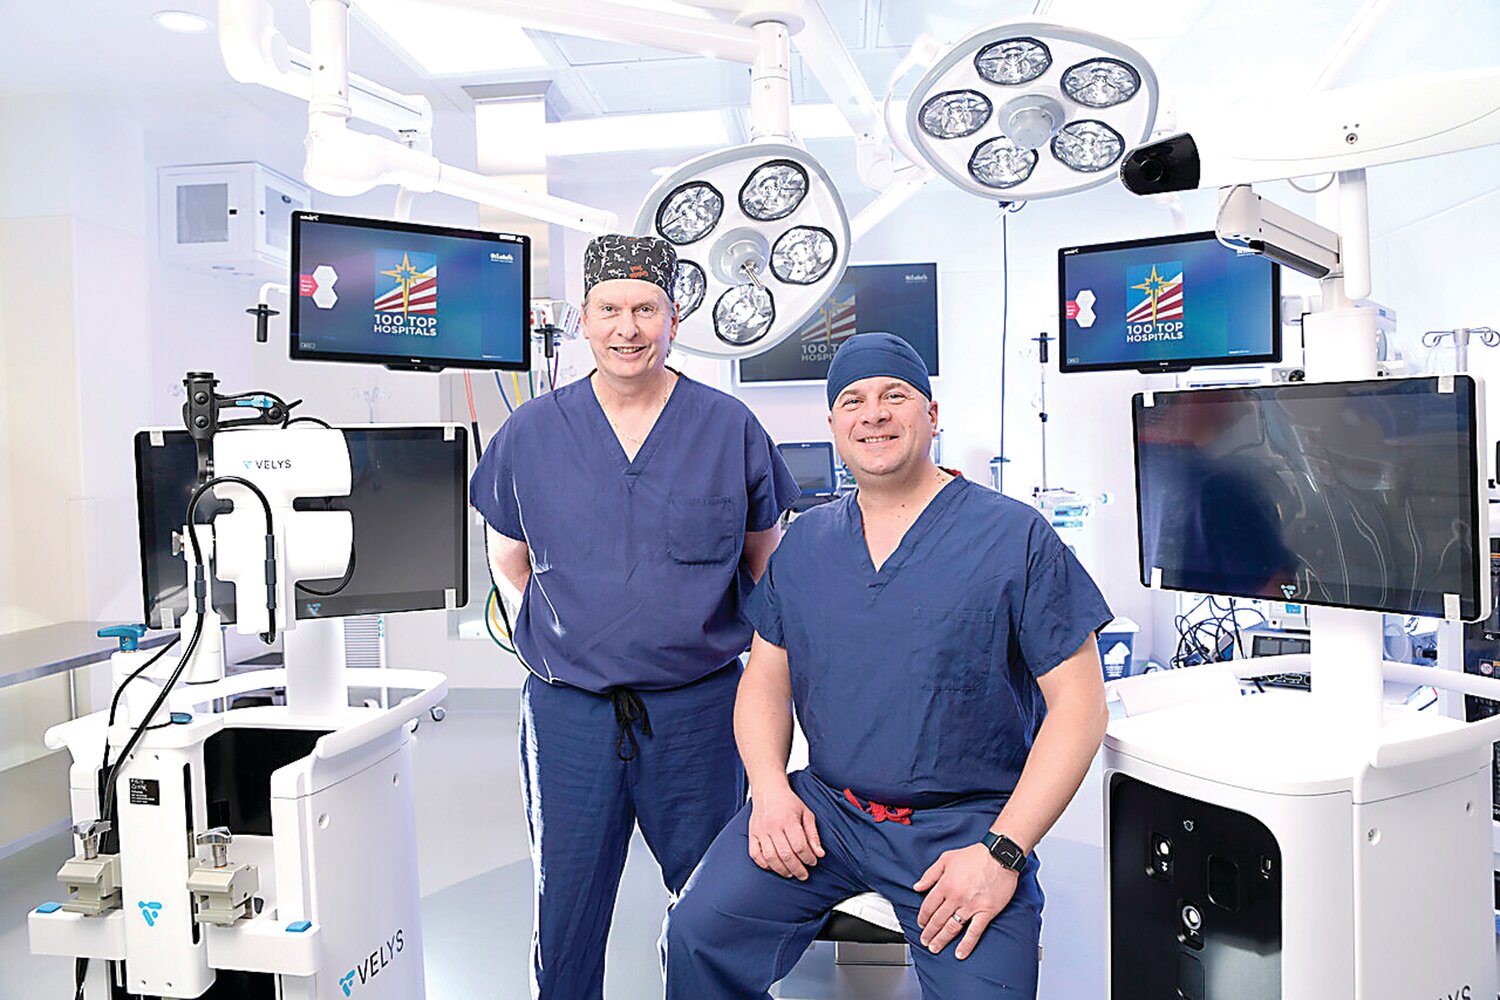 St. Luke’s orthopedic surgeons Dr. Patrick Brogle and Dr. Adam Sadler are members of the St. Luke’s orthopedic surgical team performing robotic-assisted knee replacement surgery.